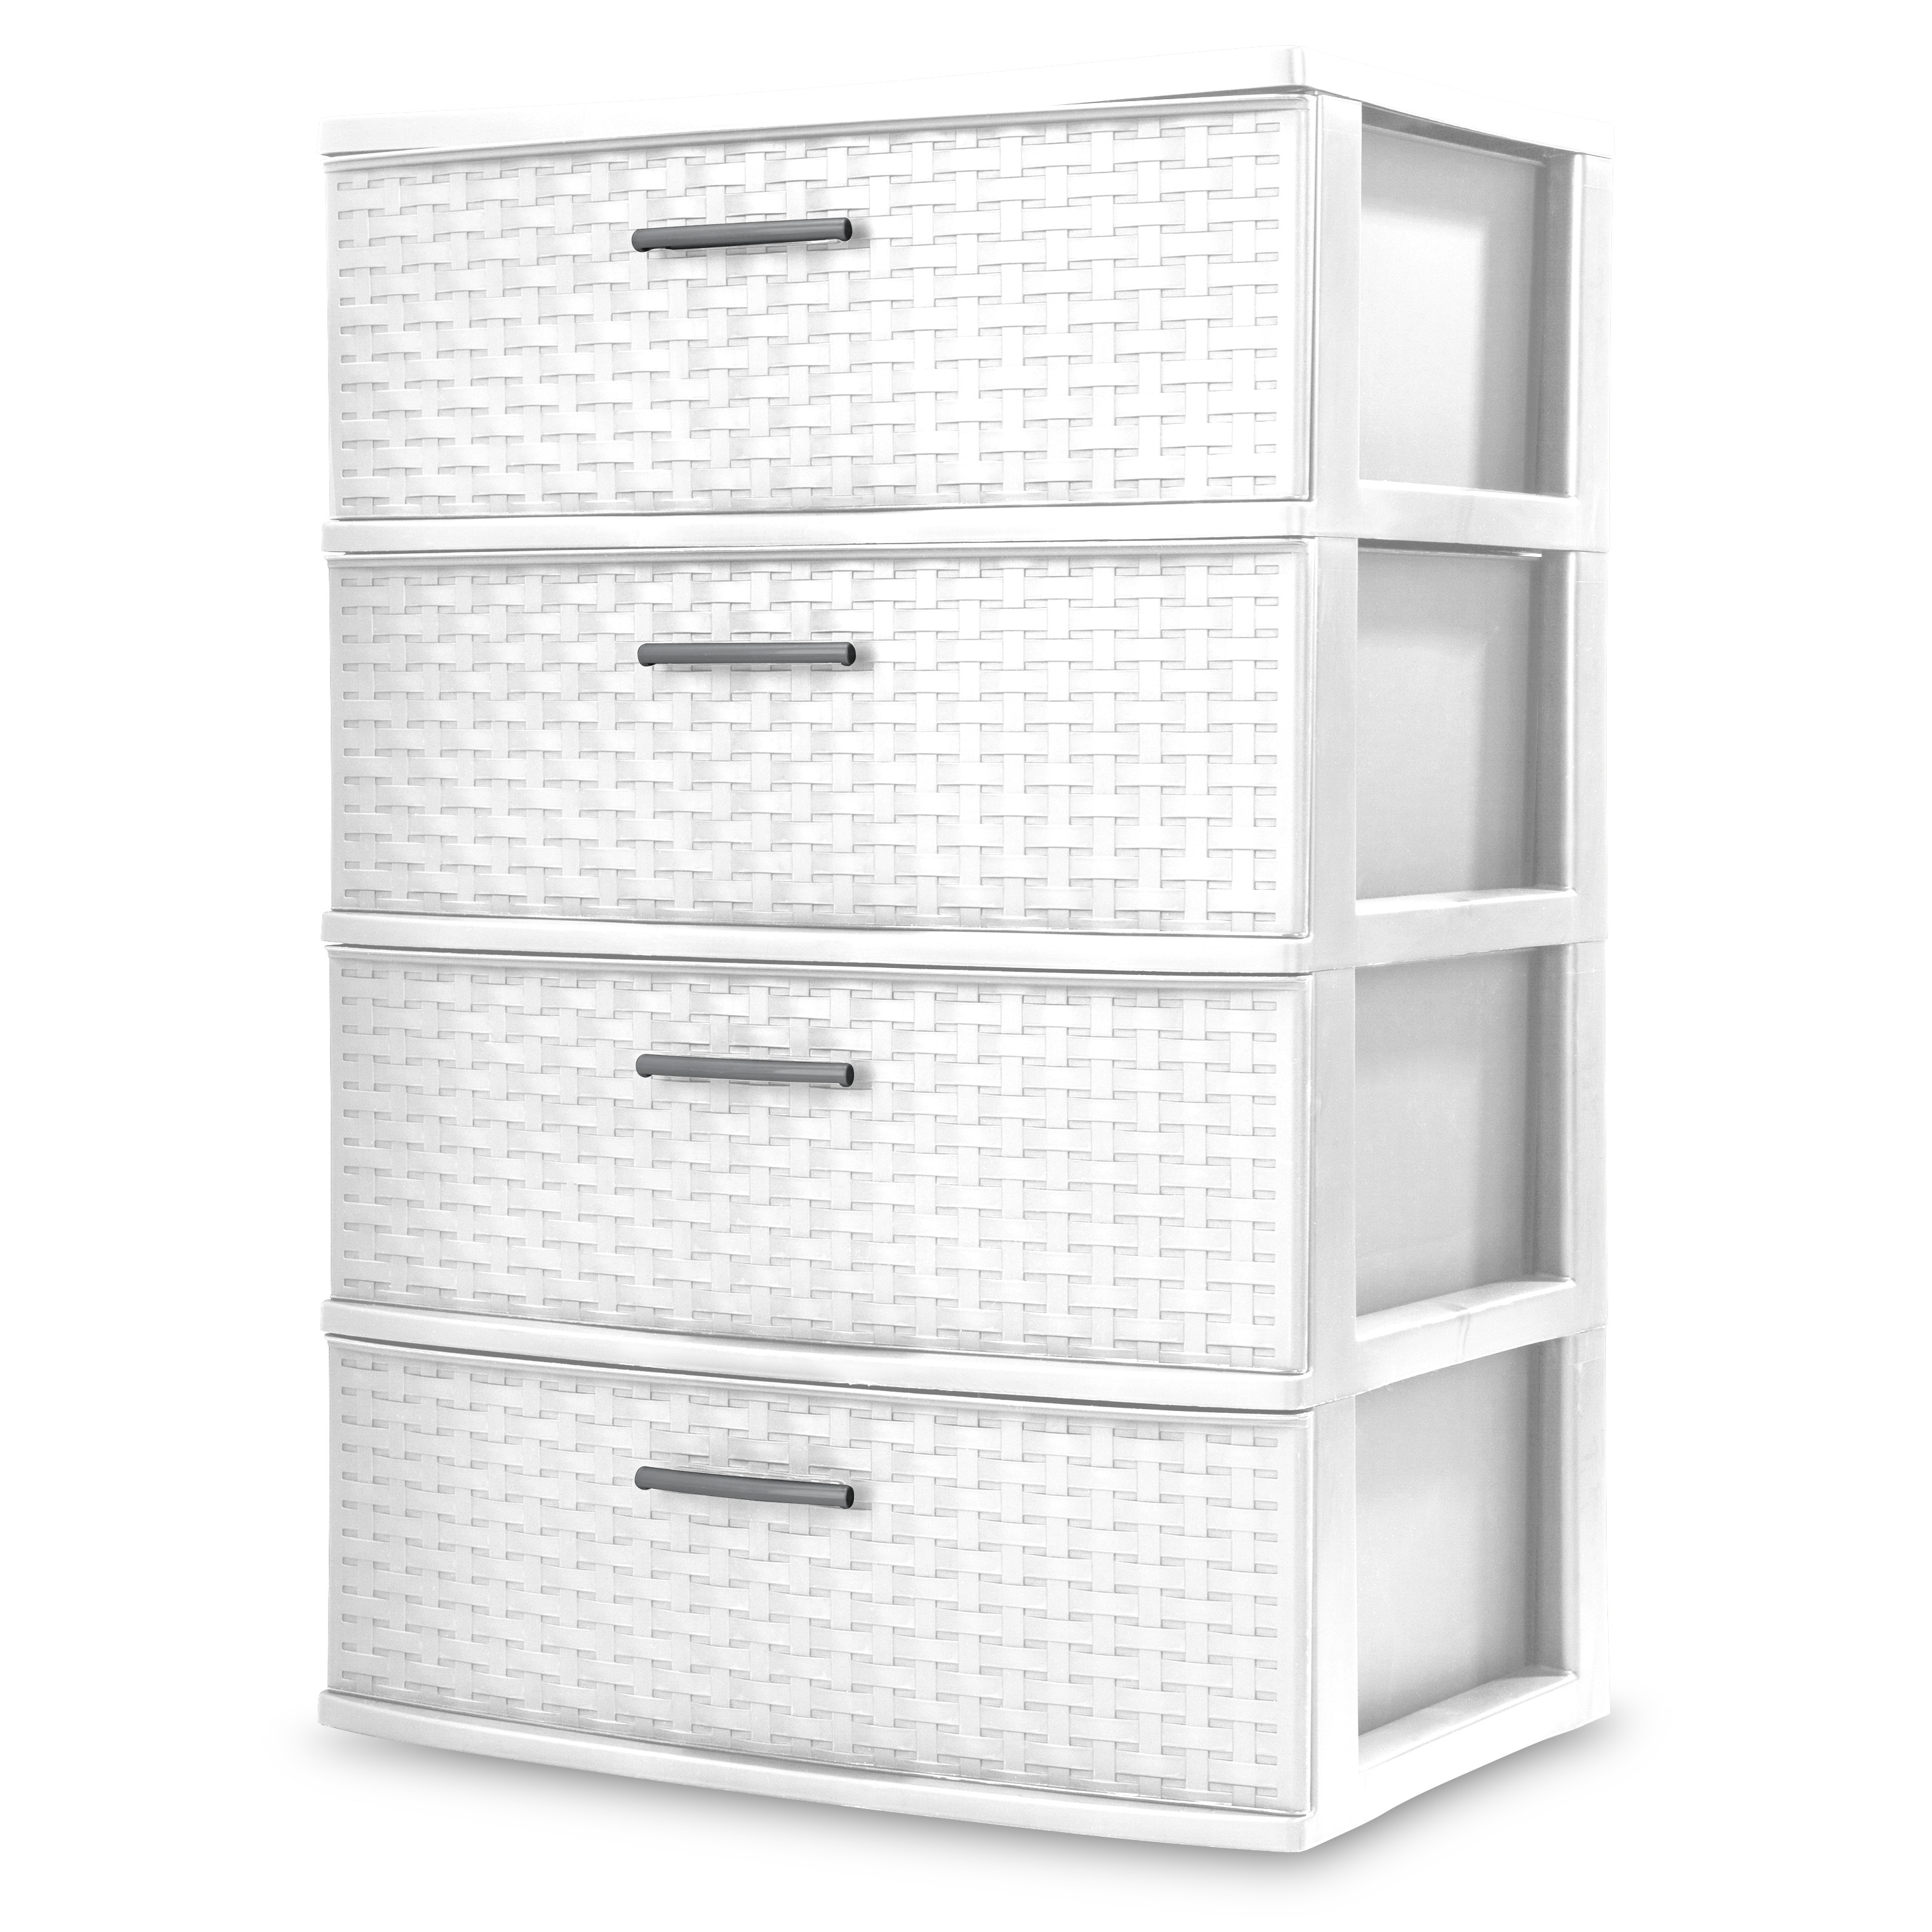 Sterilite 4 Drawer Wide Weave Tower White - image 1 of 2